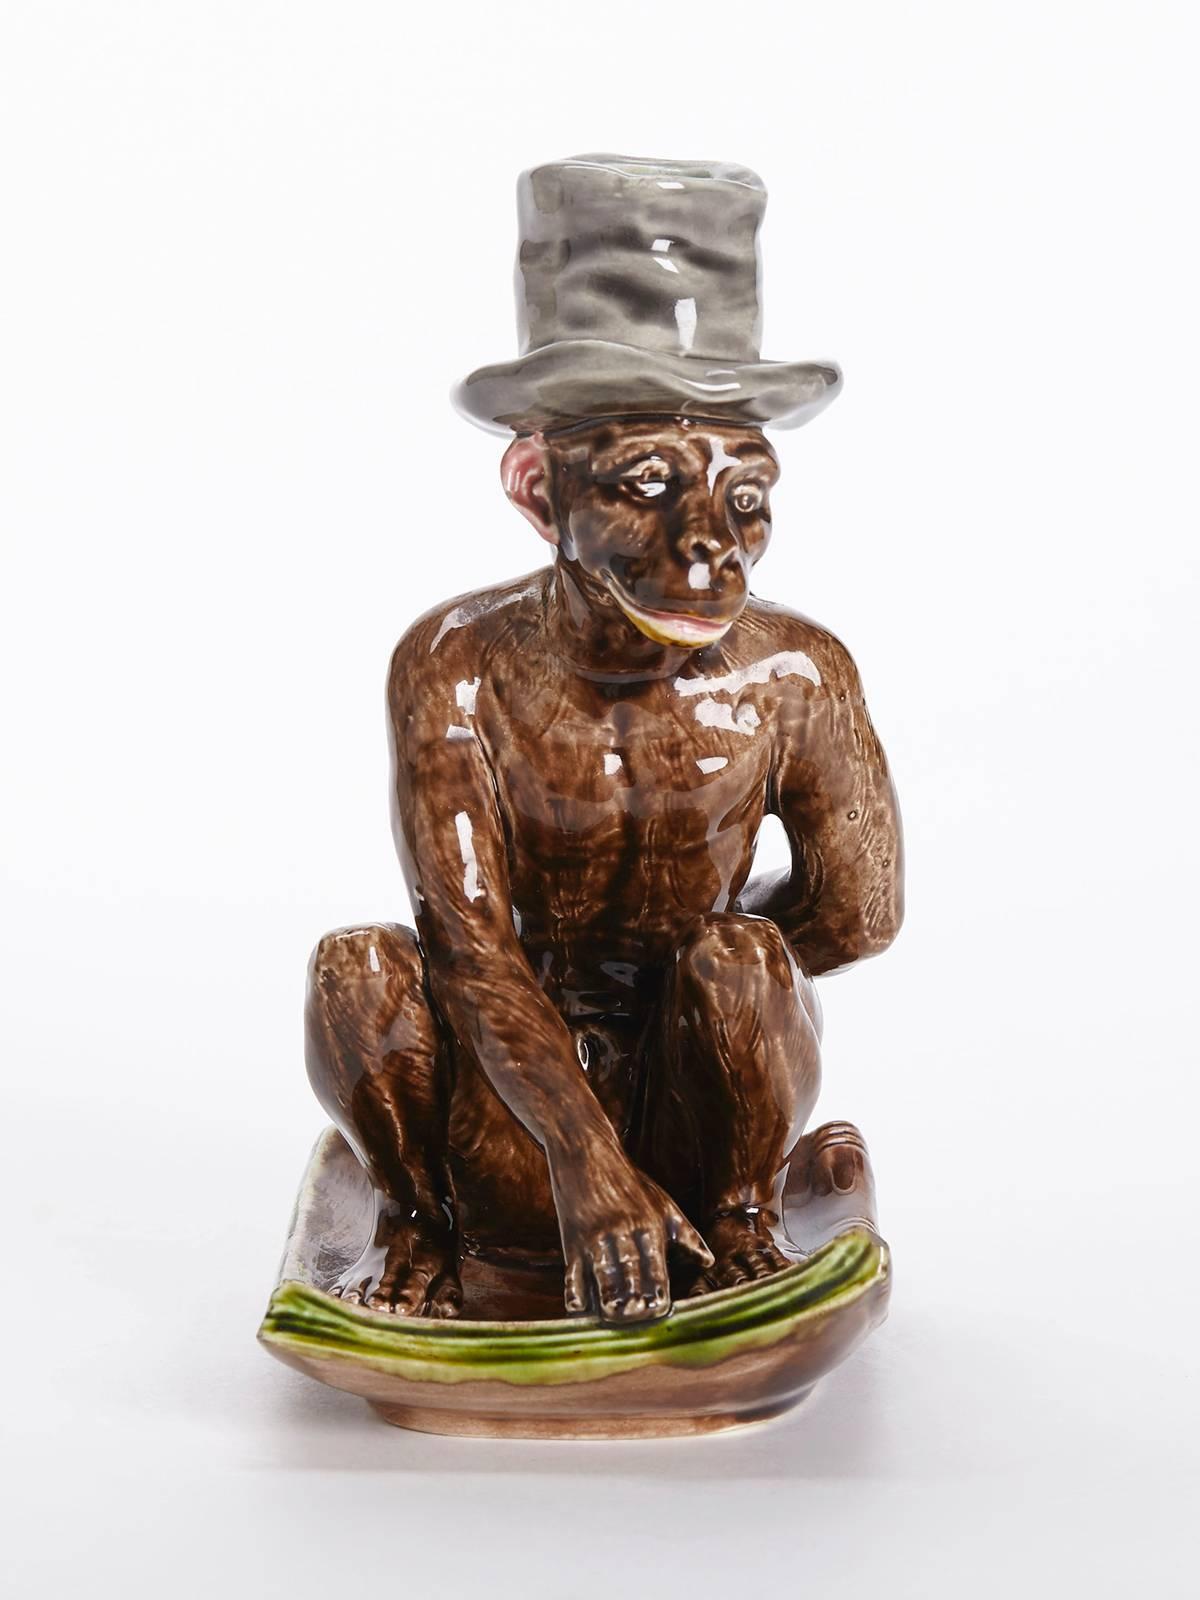 An extremely rare antique French Sarreguemines Majolica monkey candlestick or chamberstick sat on a manuscript titled Darwin. The figure is exceptionally well modeled with excellent detail and portrays the monkey seated on the manuscript and wearing